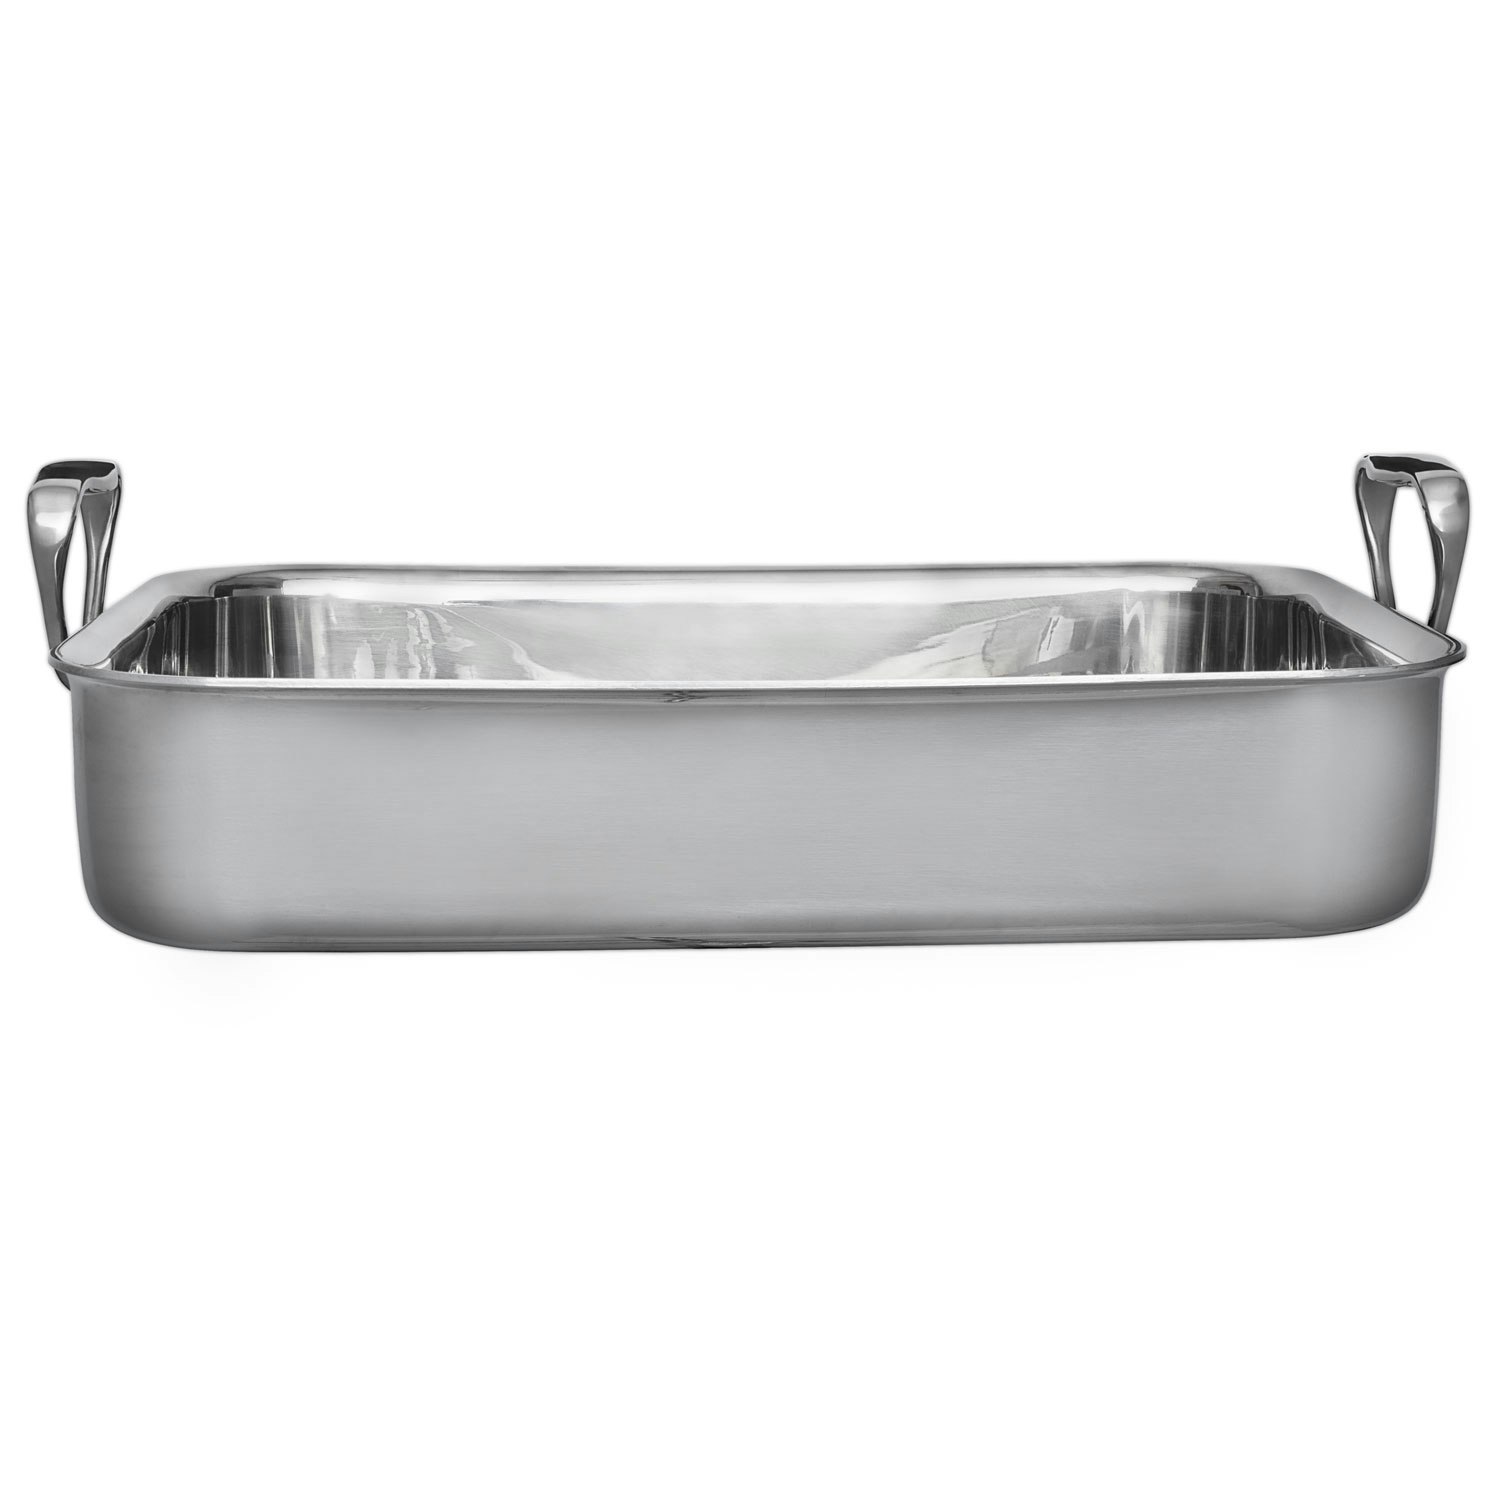 Recycled stainless steel springform pan, Ø 24 cm, New